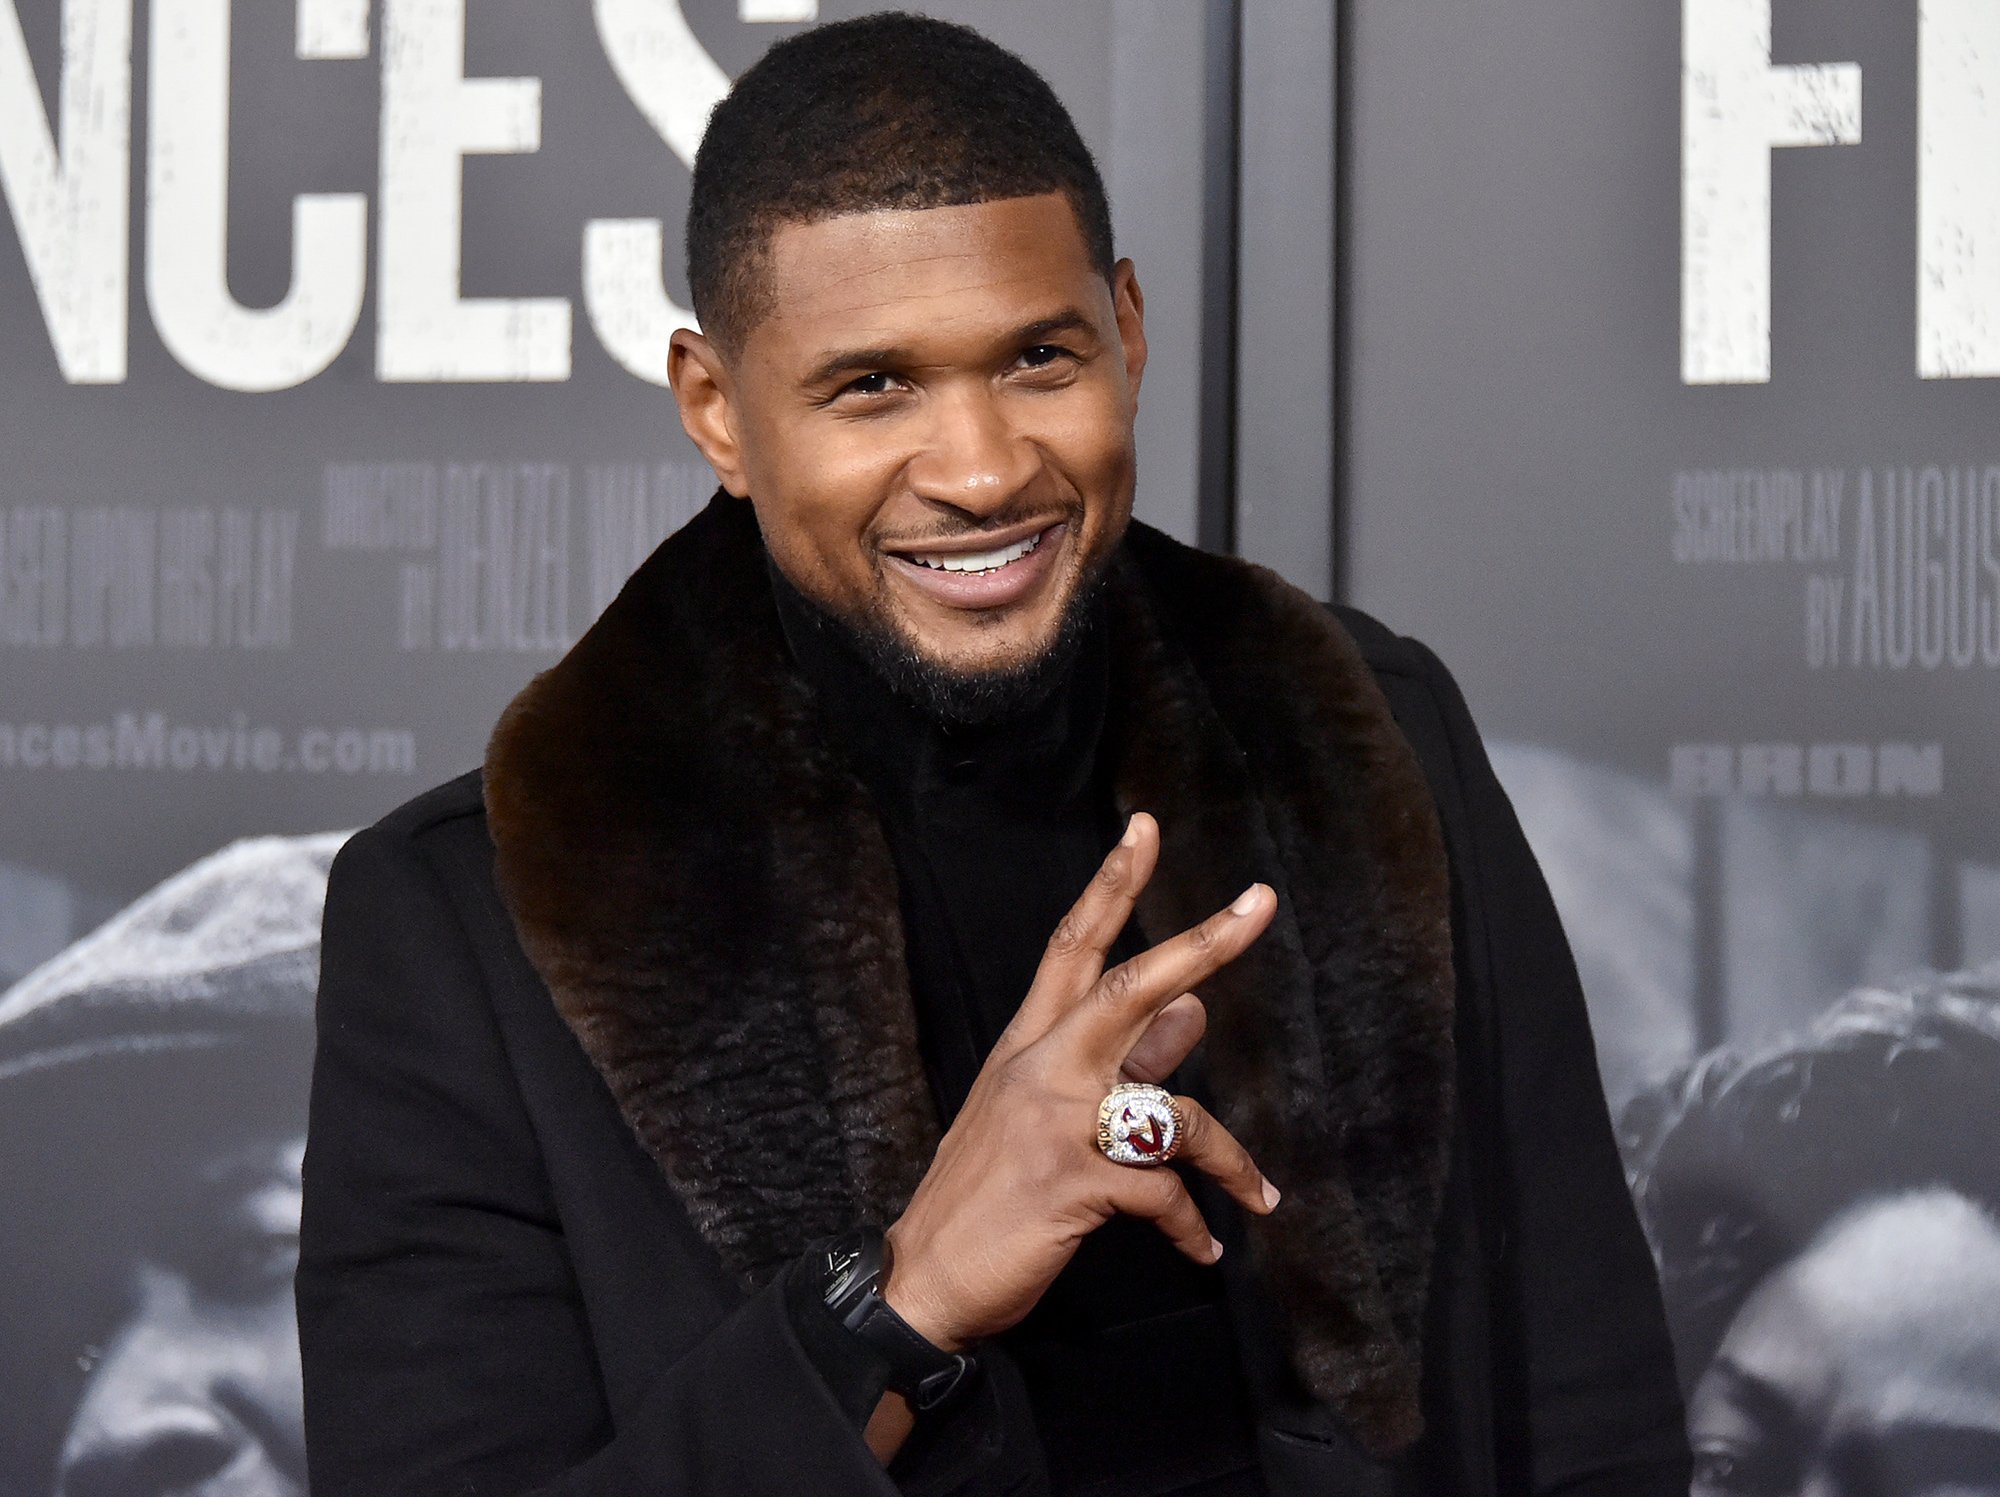 #Usher. and is titled "A". Thoughts? 